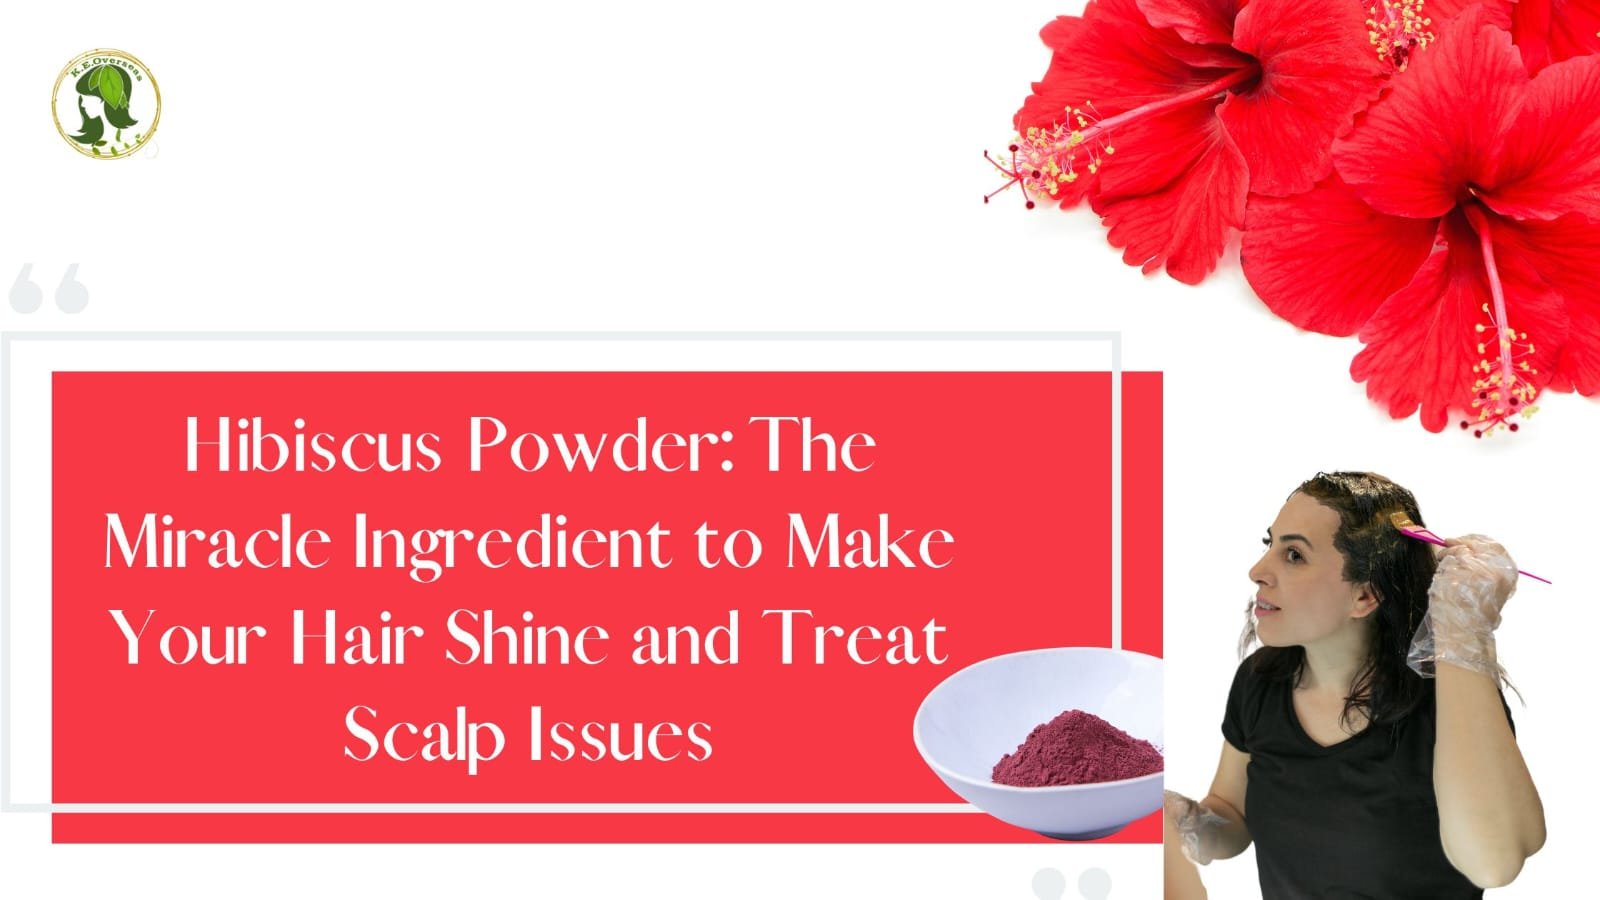 Hibiscus Powder The Miracle Ingredient to Make Your Hair Shine and Treat Scalp Issues